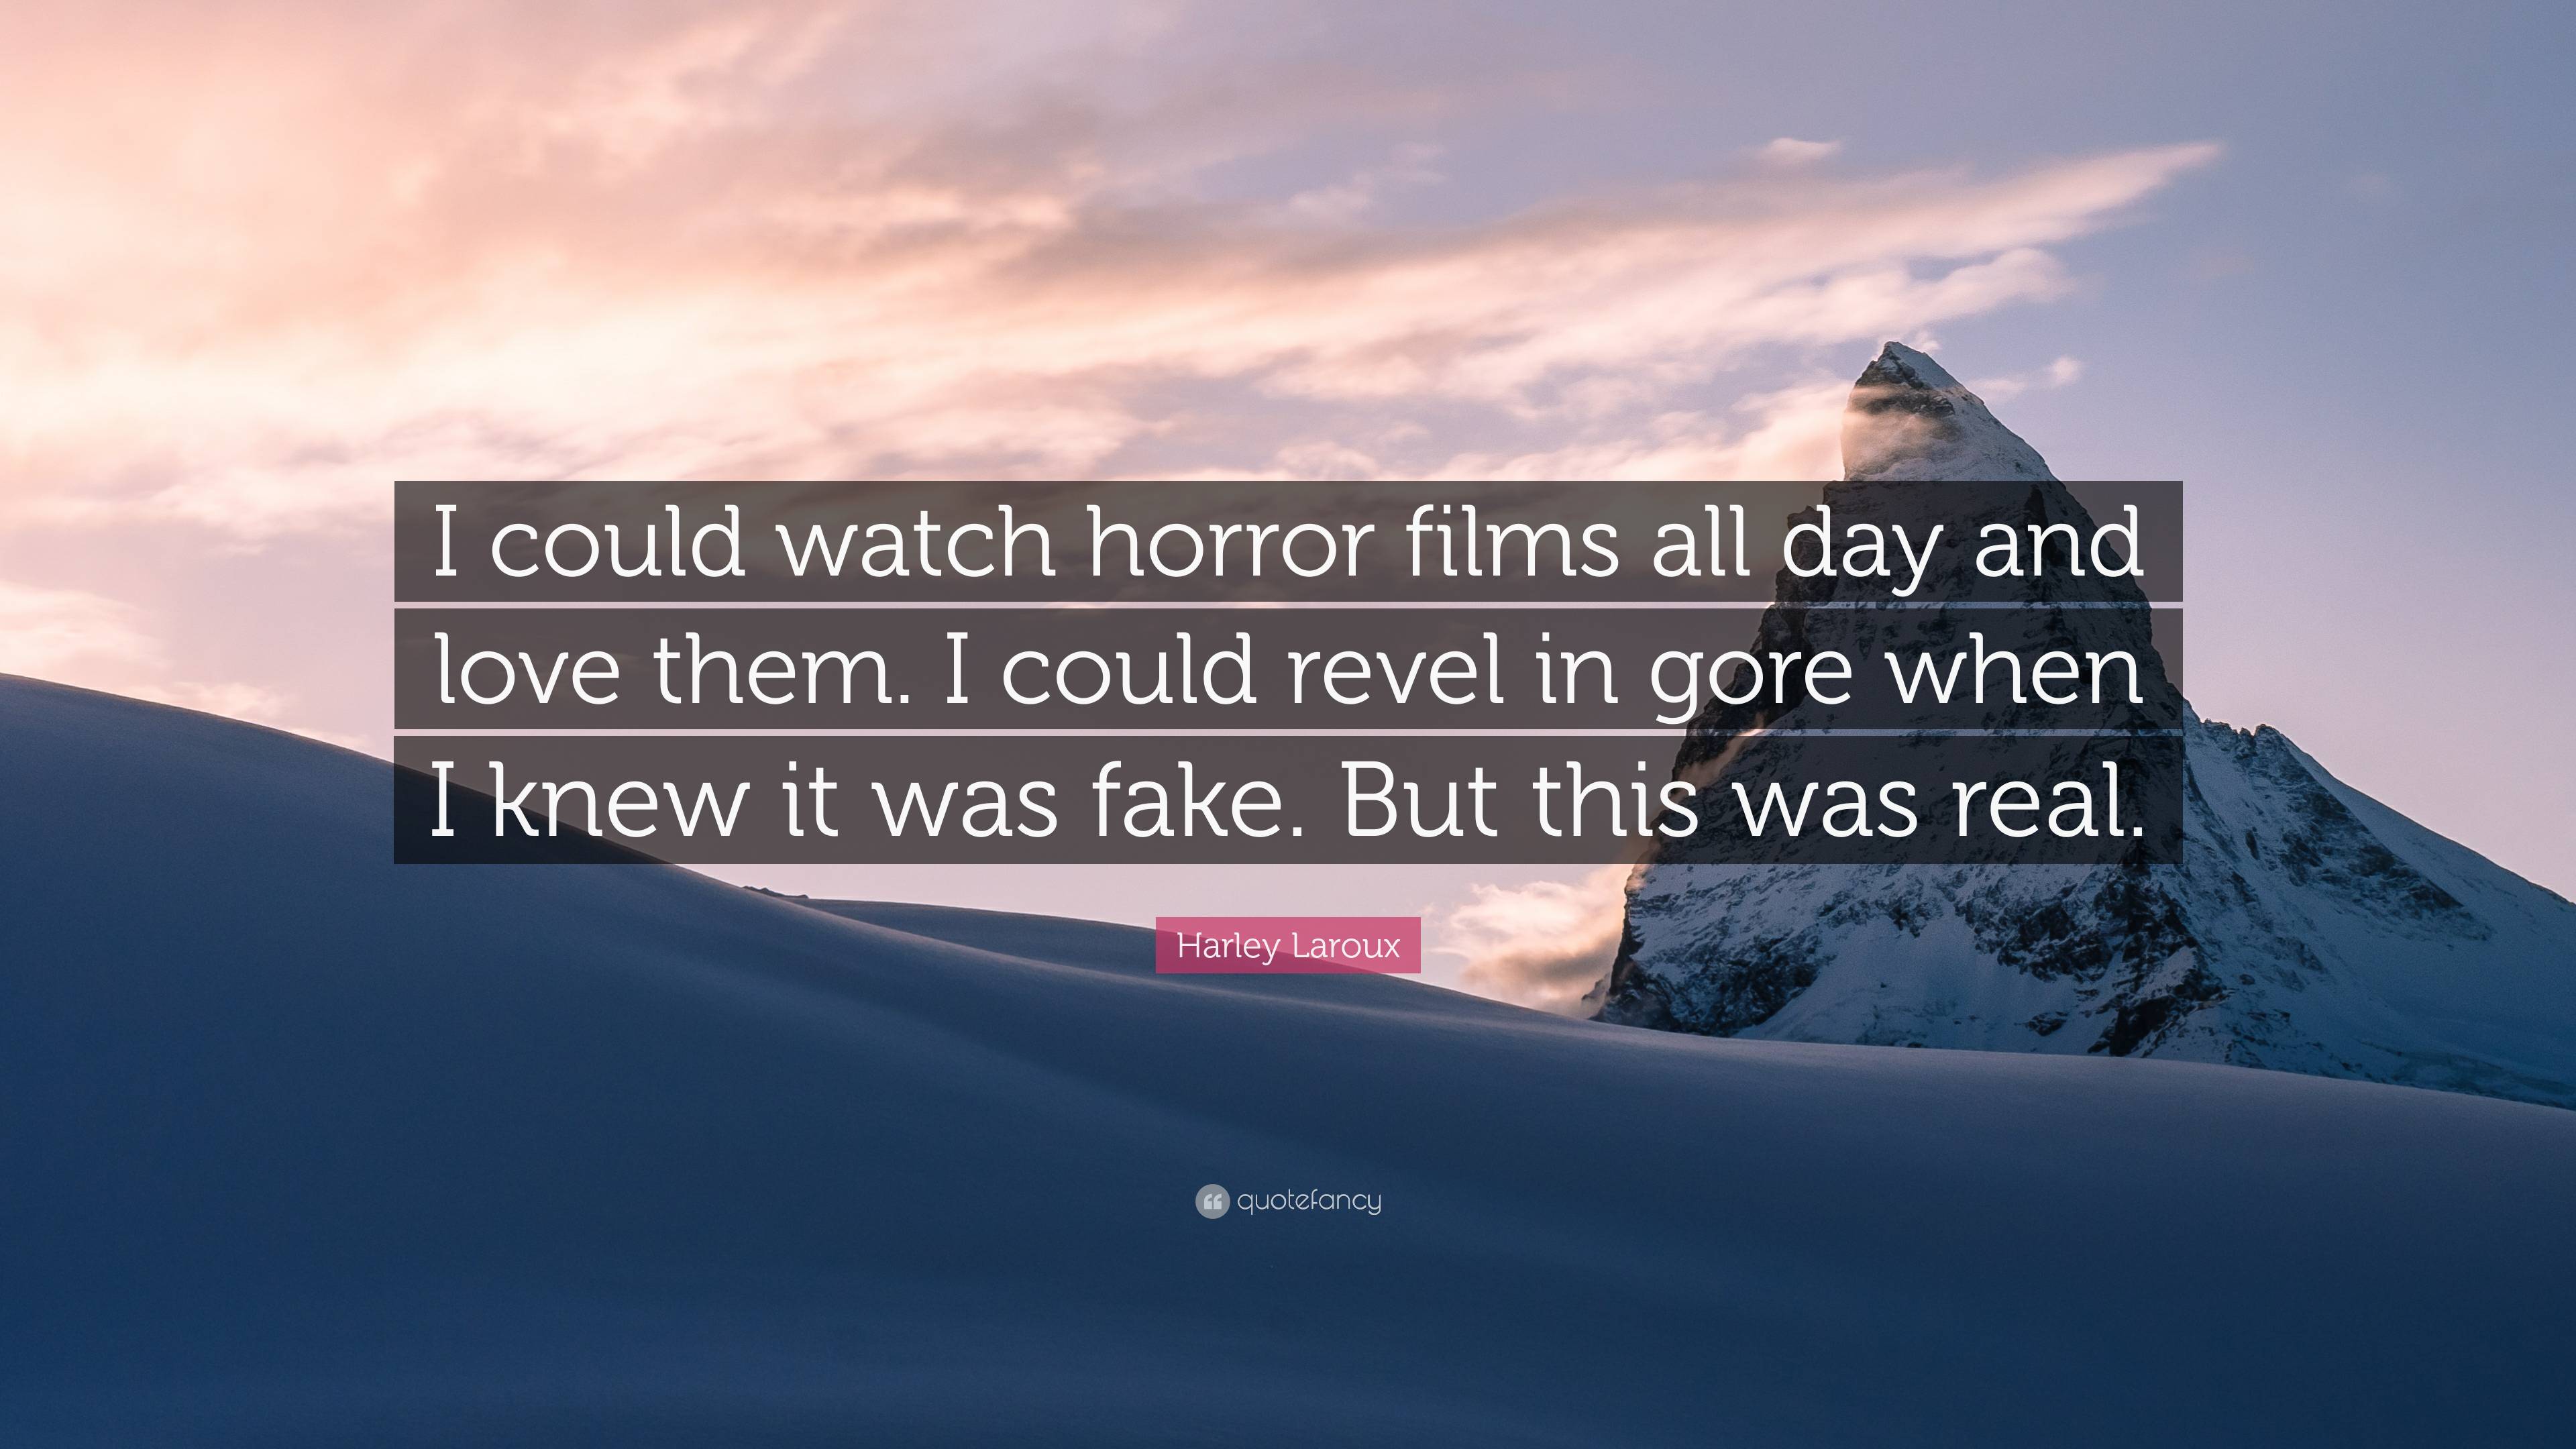 Harley Laroux Quote: “I could watch horror films all day and love them. I  could revel